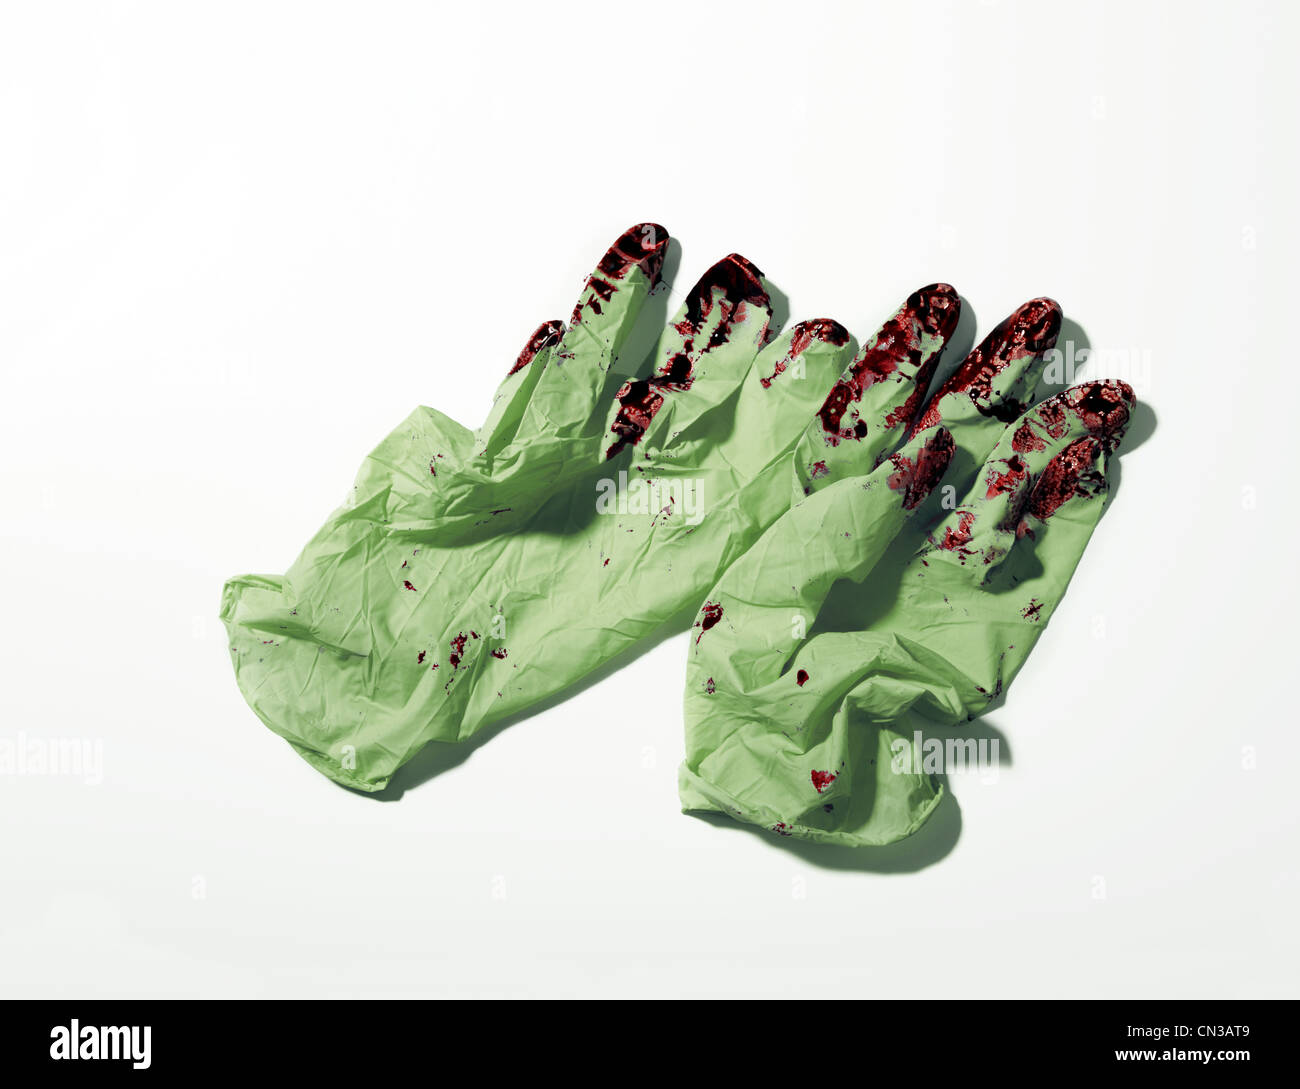 Pair of bloodied surgical gloves Stock Photo